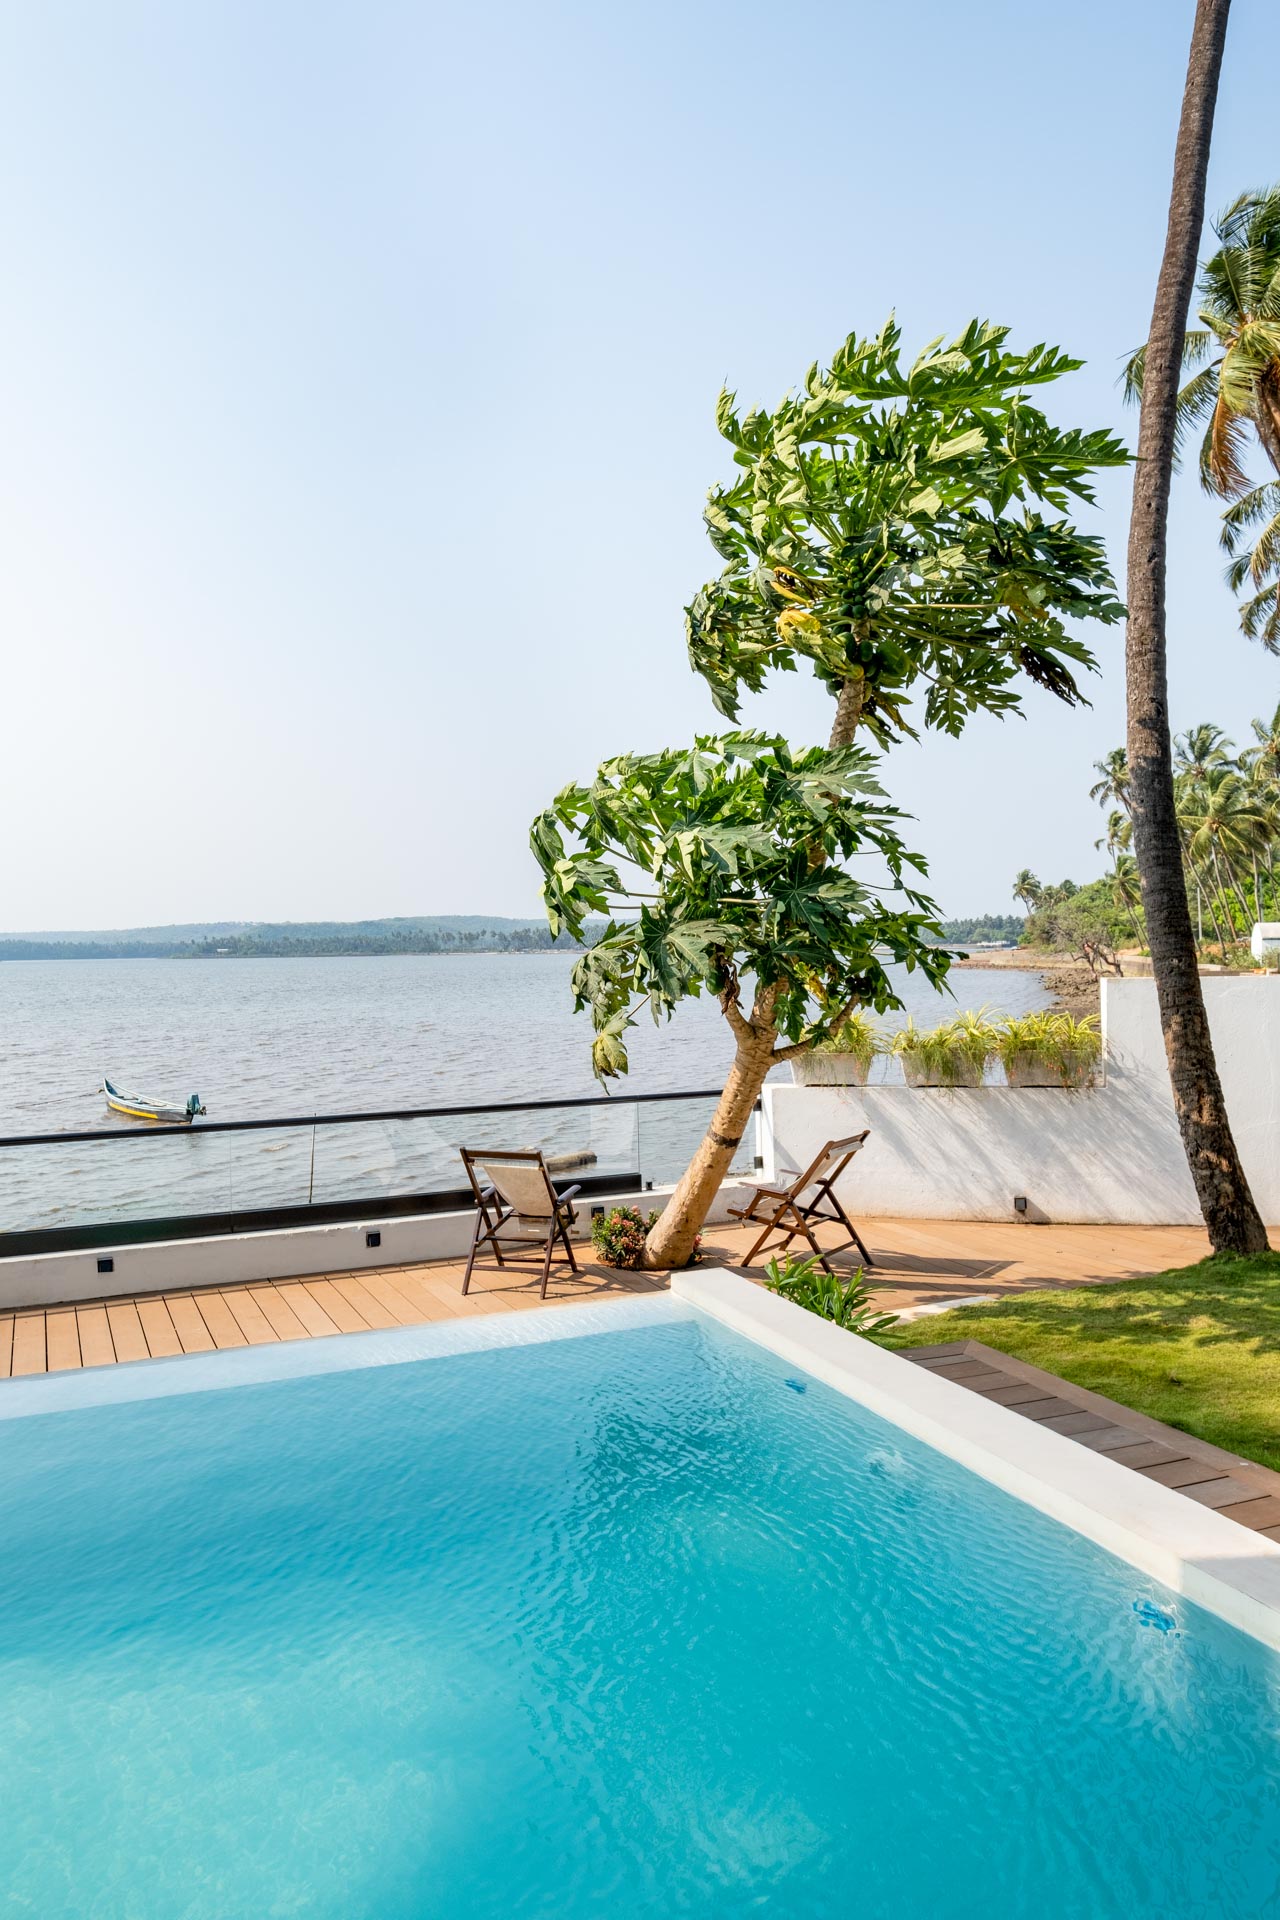 Glasshouse On The Bay - Private pool